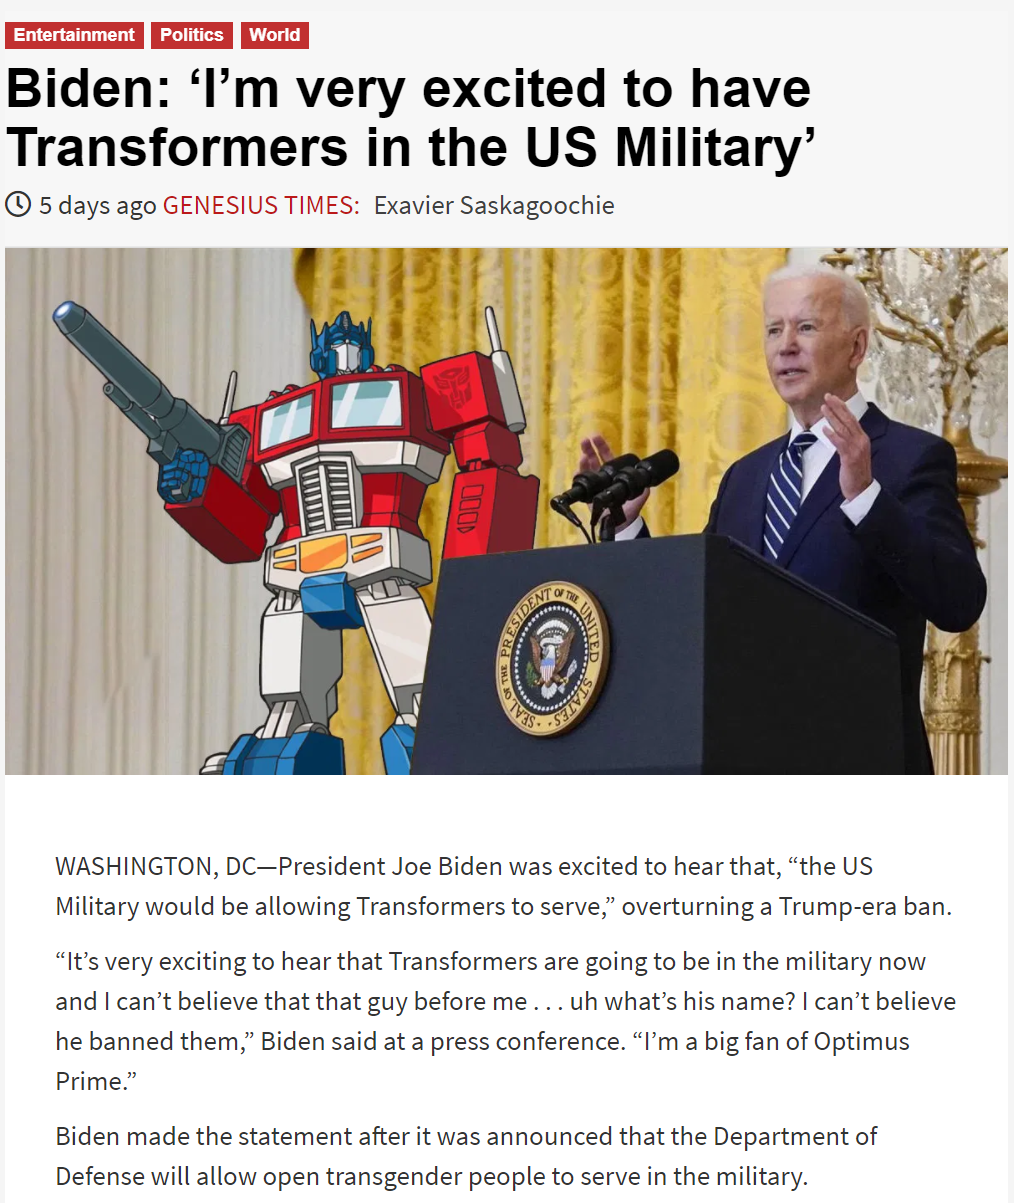 ‘I’m very excited to have Transformers in the US Military’ – IOTW Report